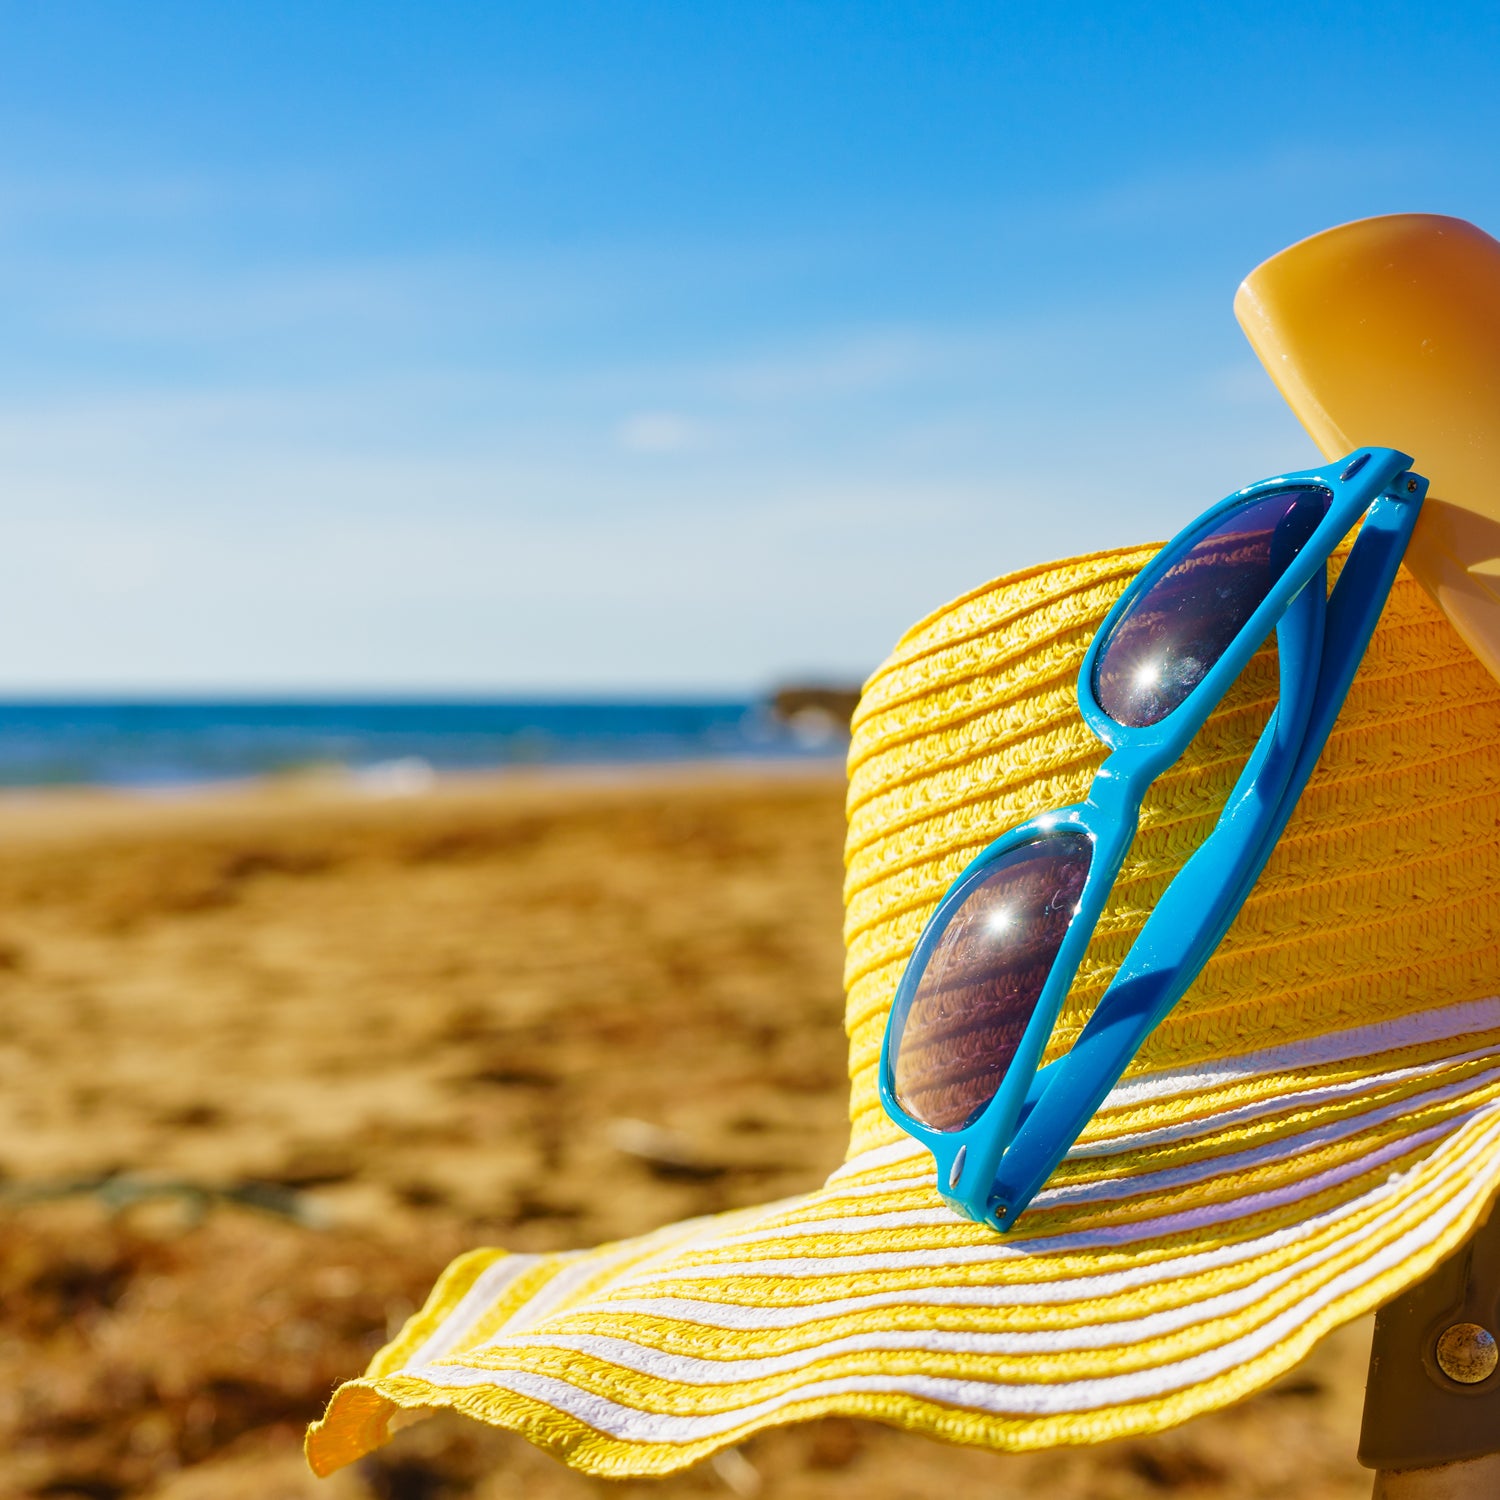 A hat and sunglasses rest on a sunny beach - inspiration for our "Cabana" wax melt scent